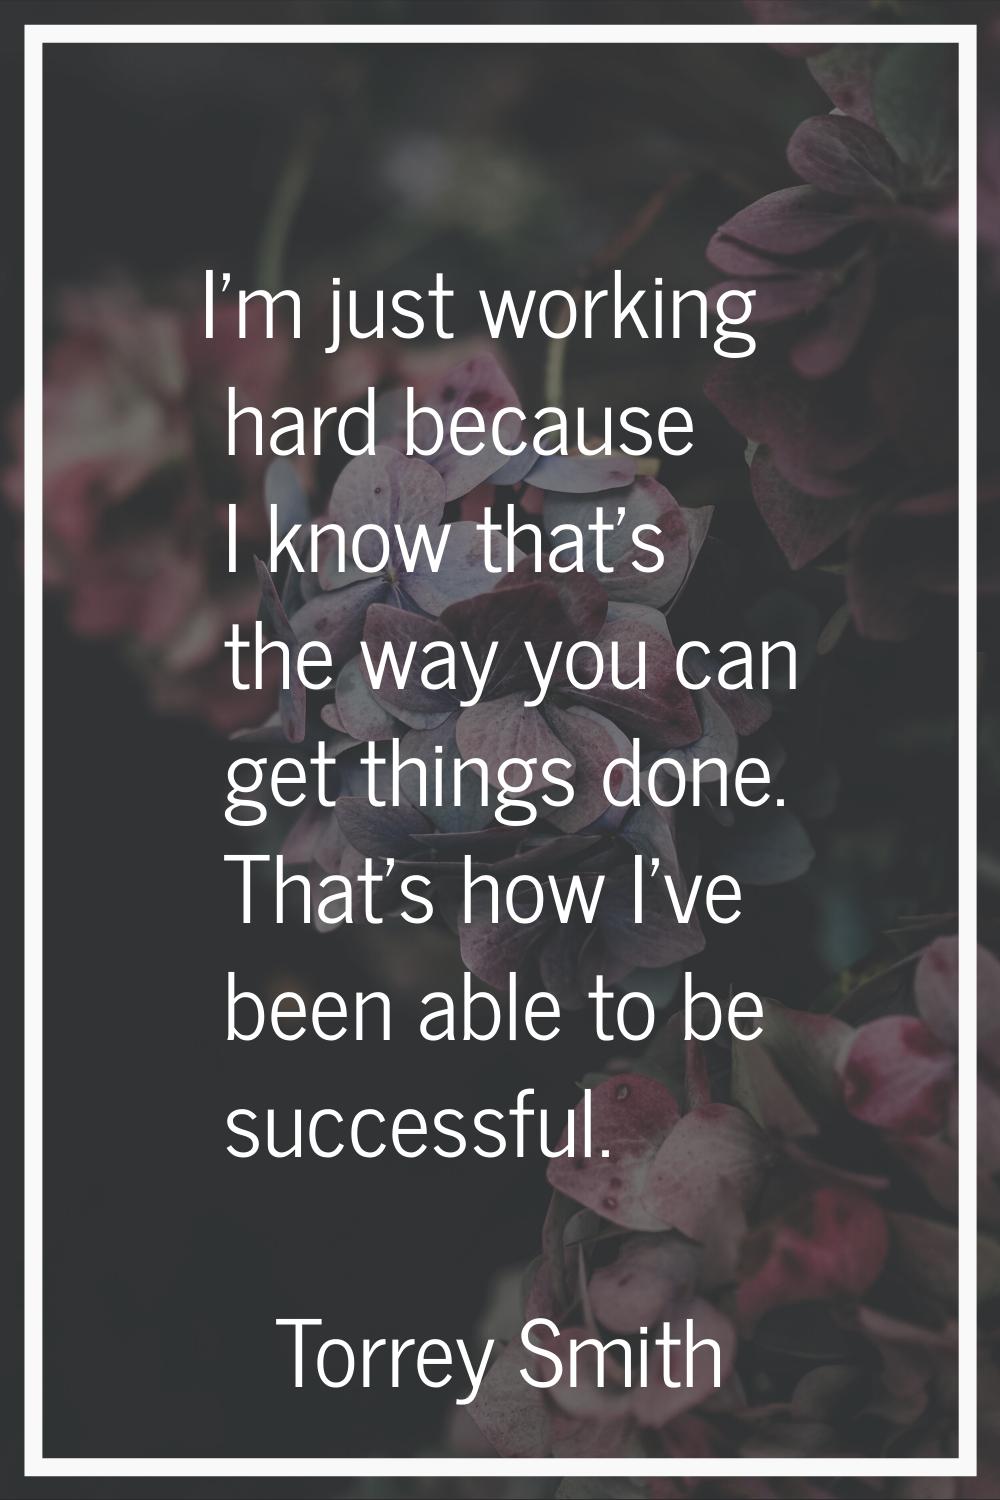 I'm just working hard because I know that's the way you can get things done. That's how I've been a